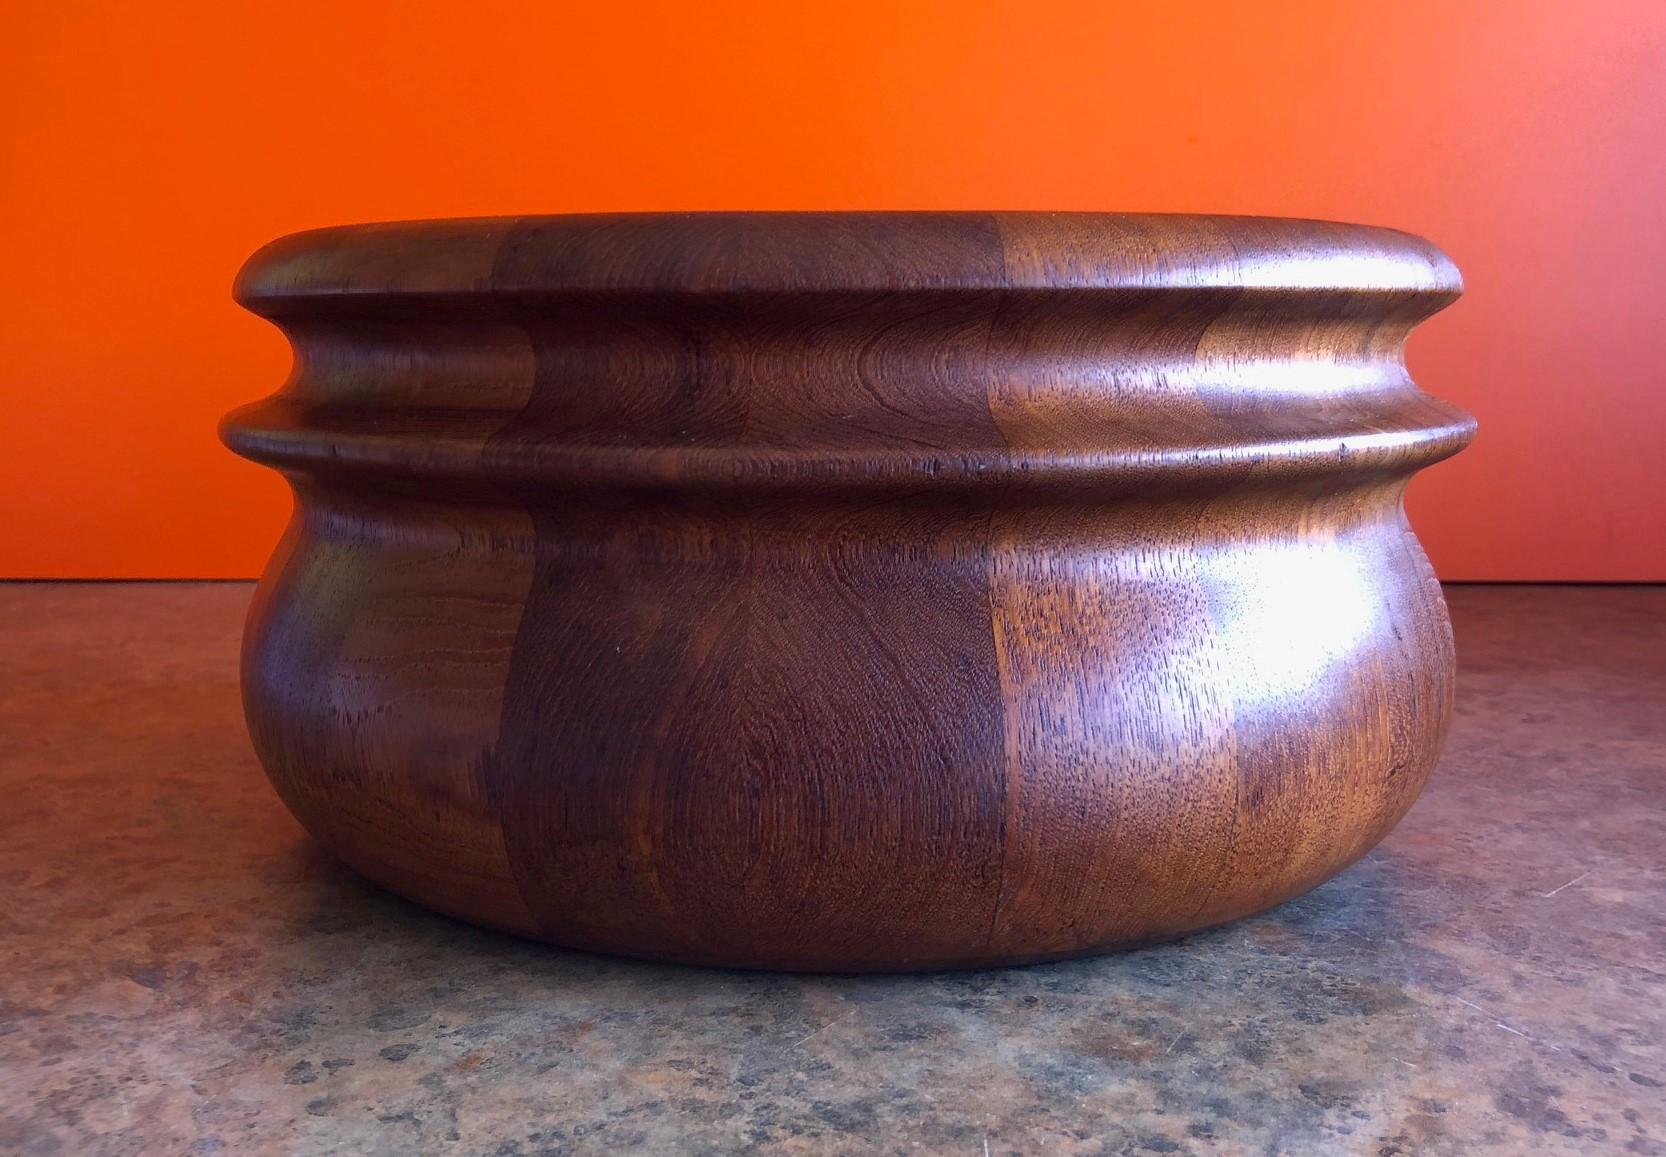 Well crafted Danish staved teak bowl, circa 1960s. The bowl is in excellent condition and is 10